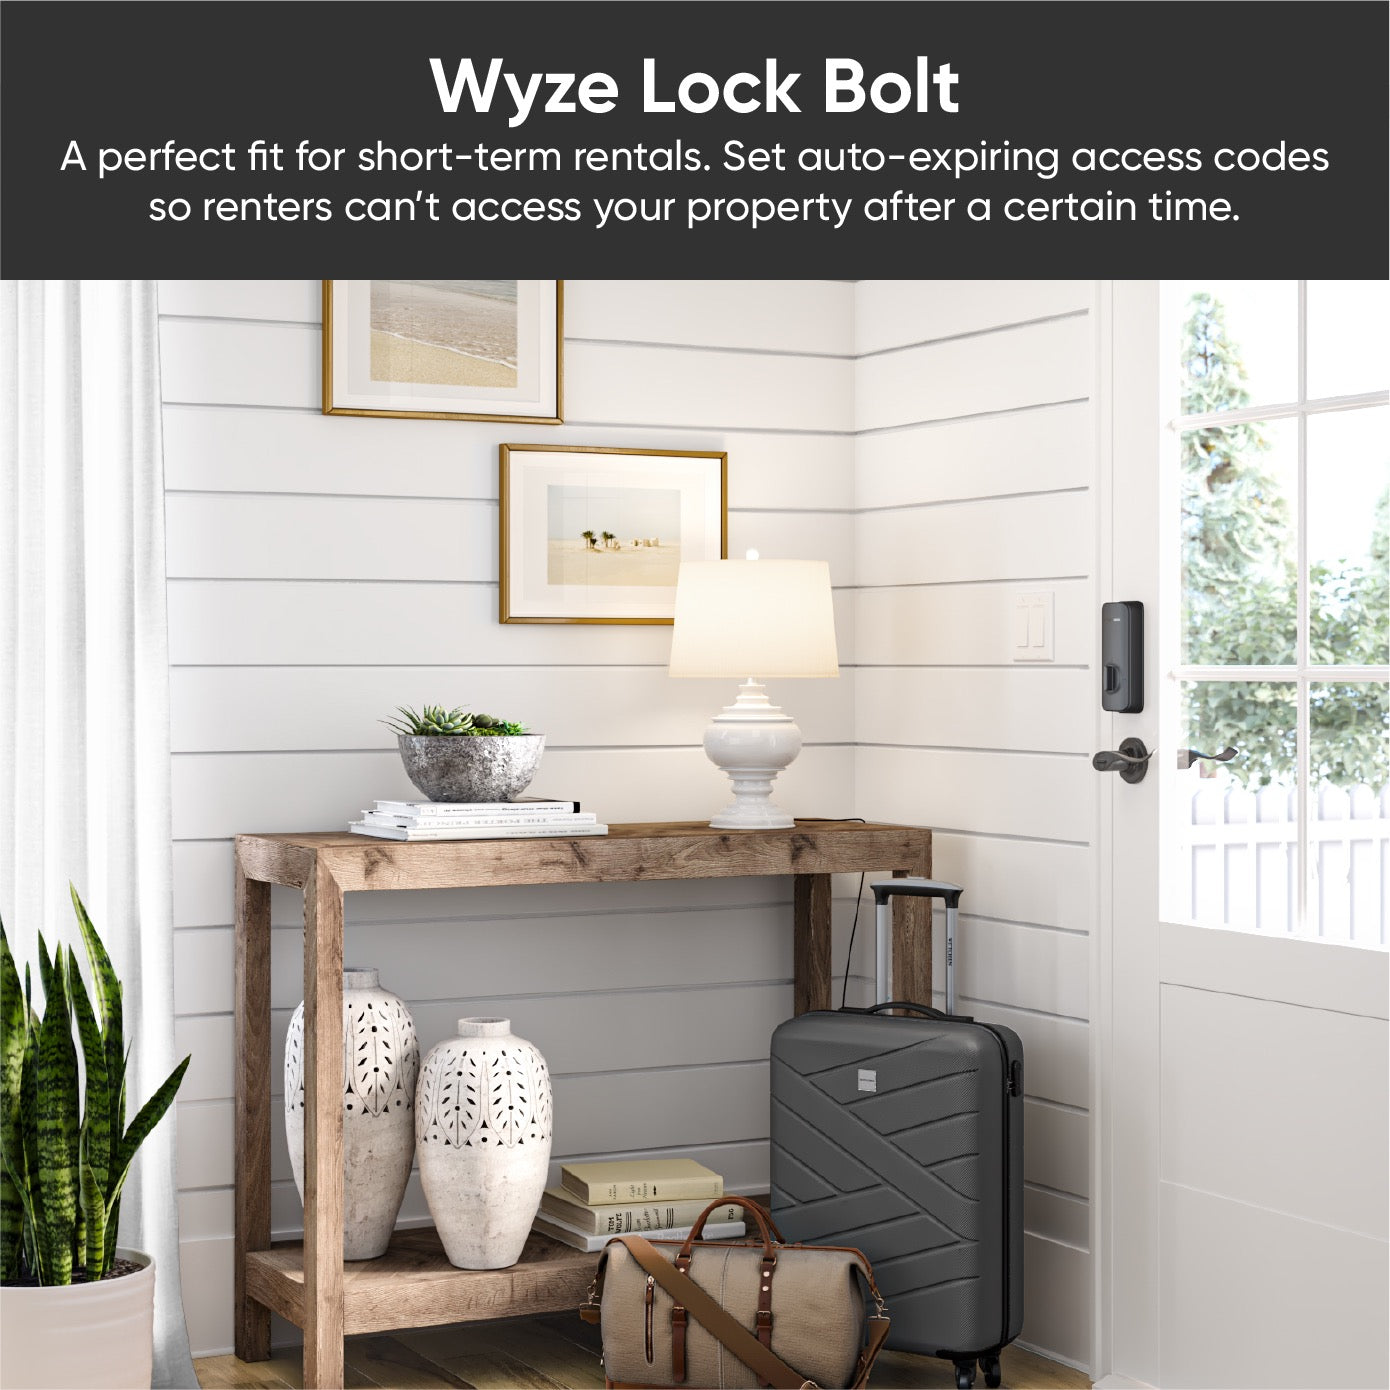 Entryway with a side table and luggage next to a white wood door with the Wyze Lock Bolt installed.